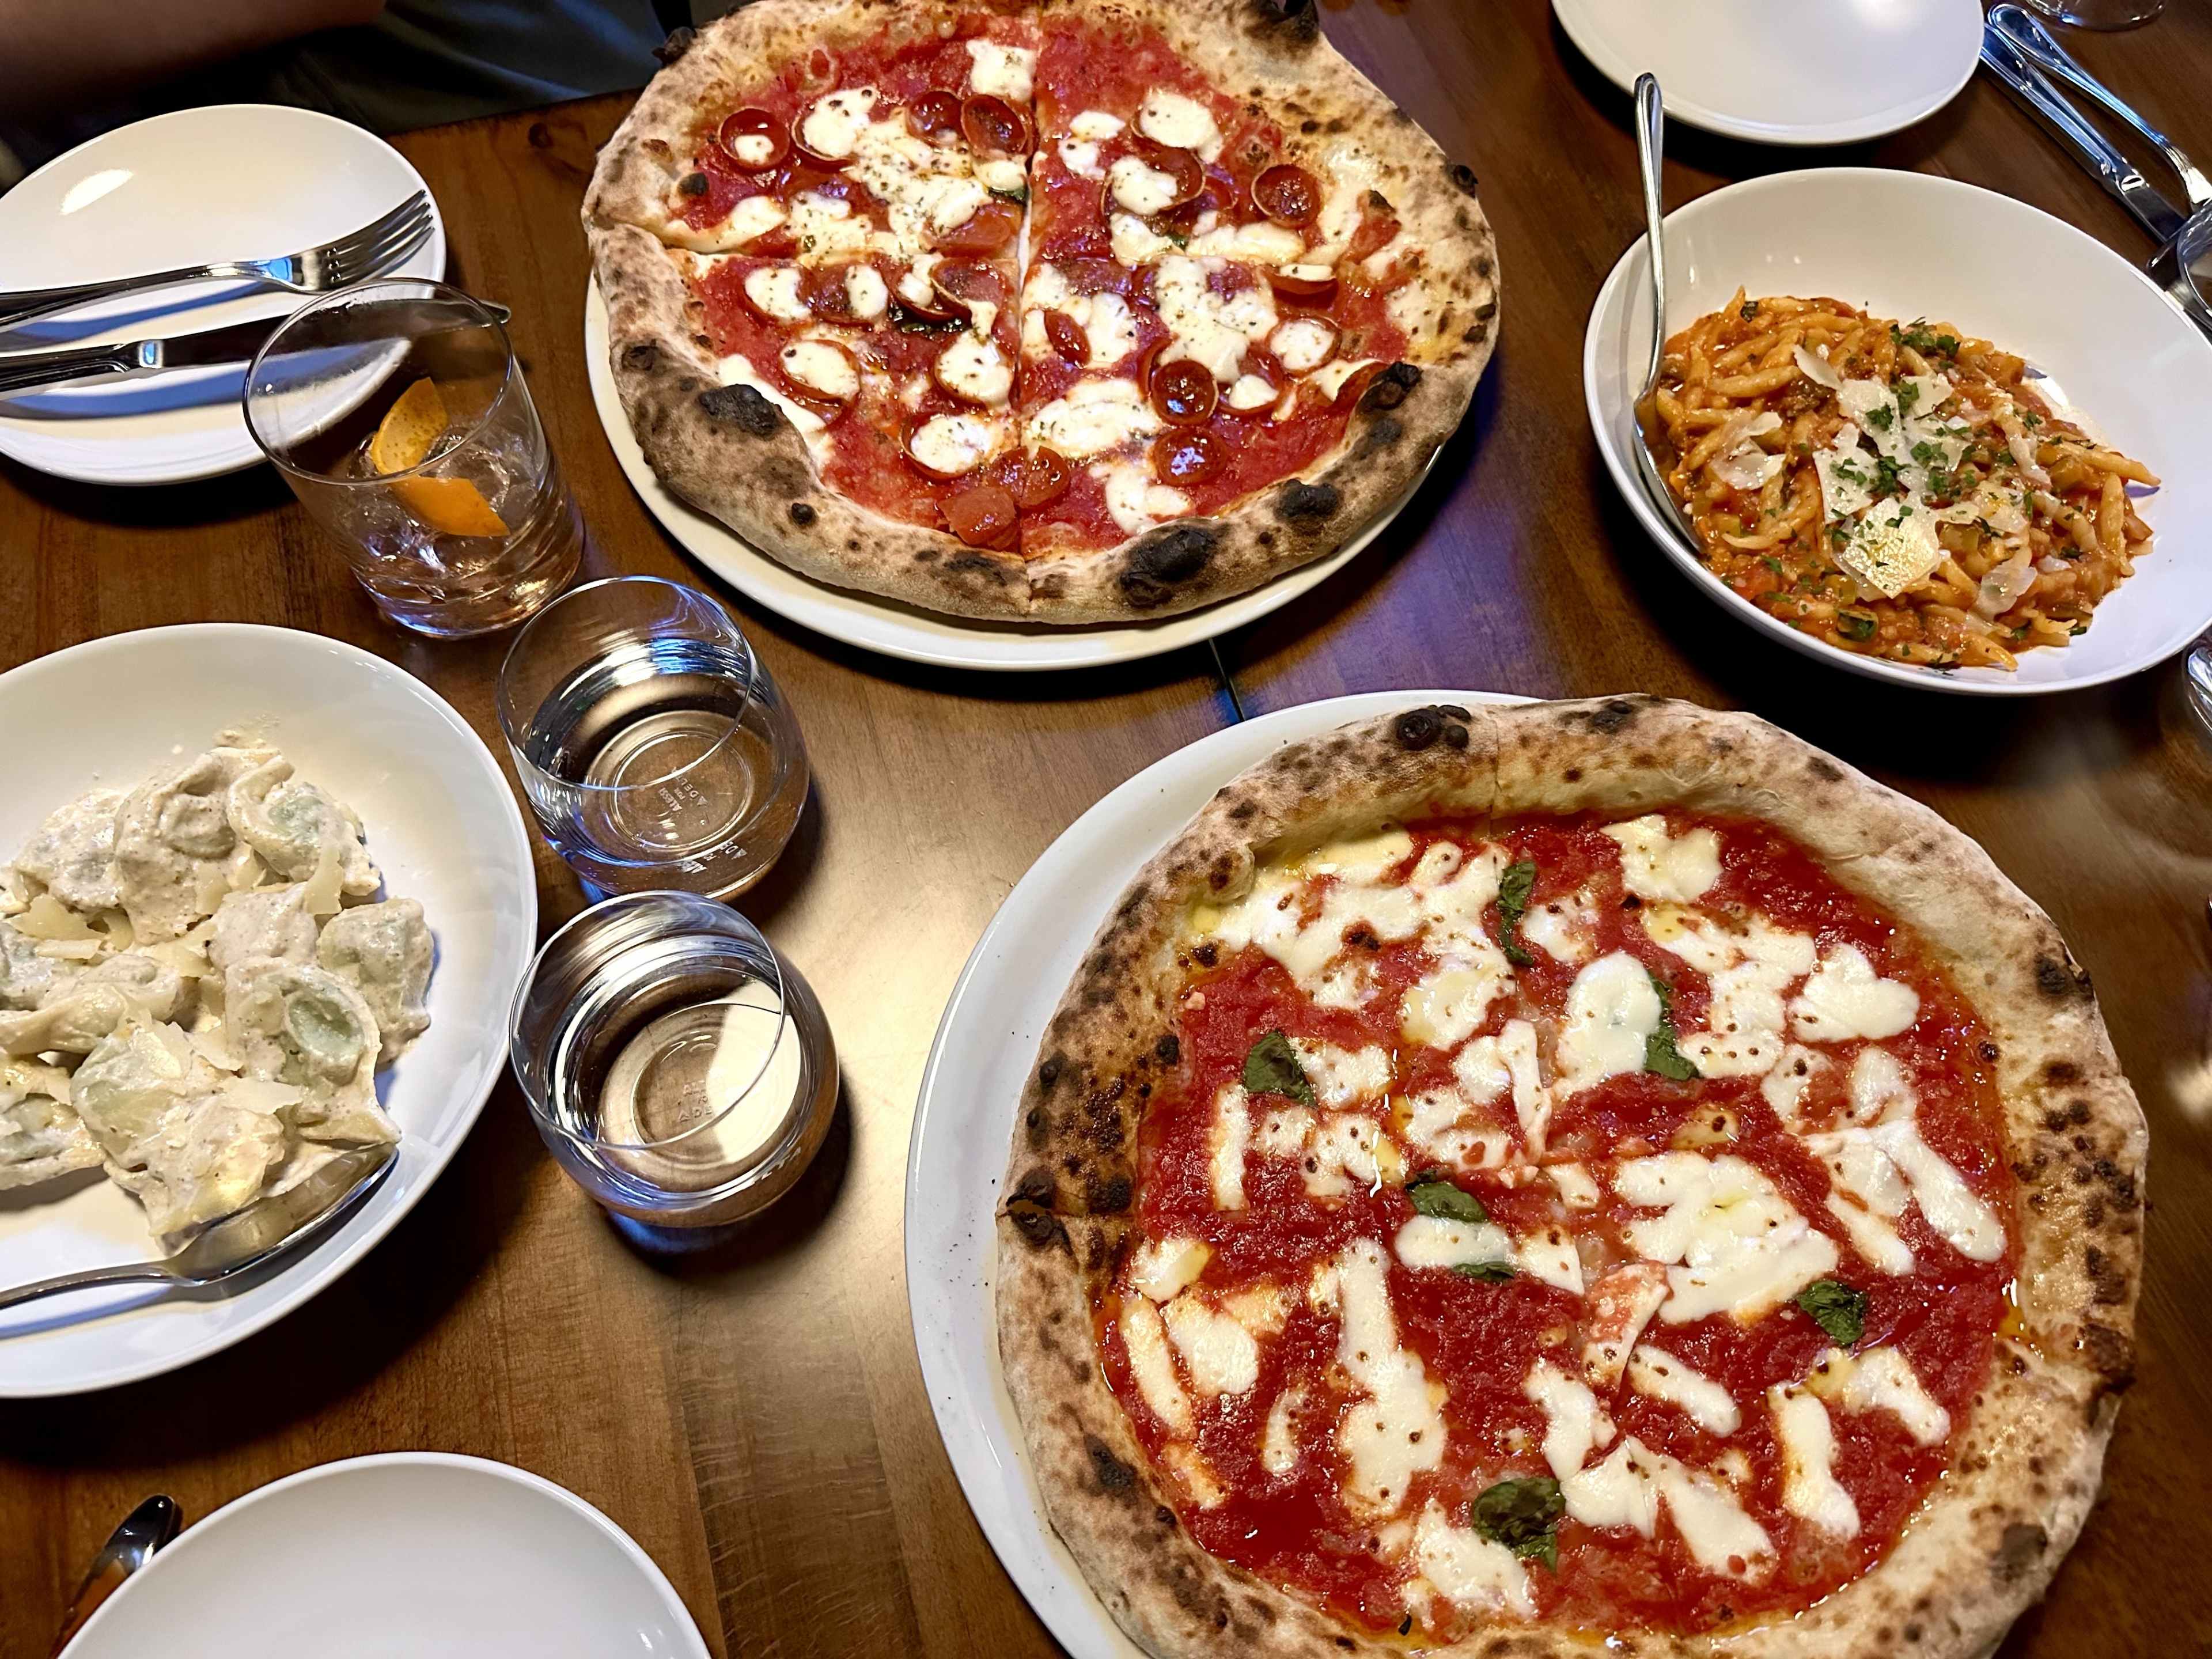 Two Neopolitan pizza pies and two bowls of pasta at a wooden table